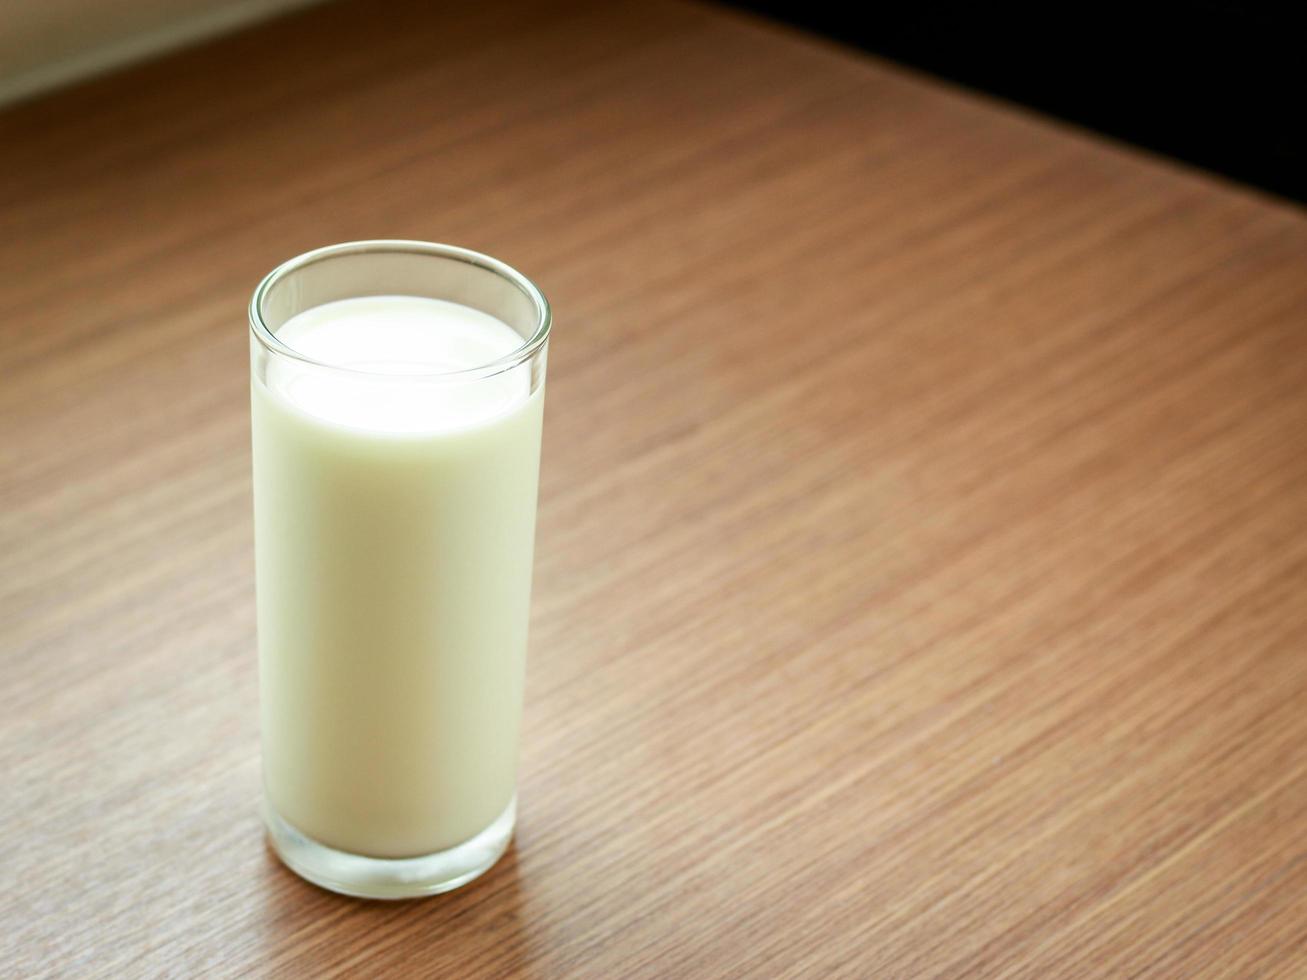 Glass of milk on a wooden table, healthy food photo